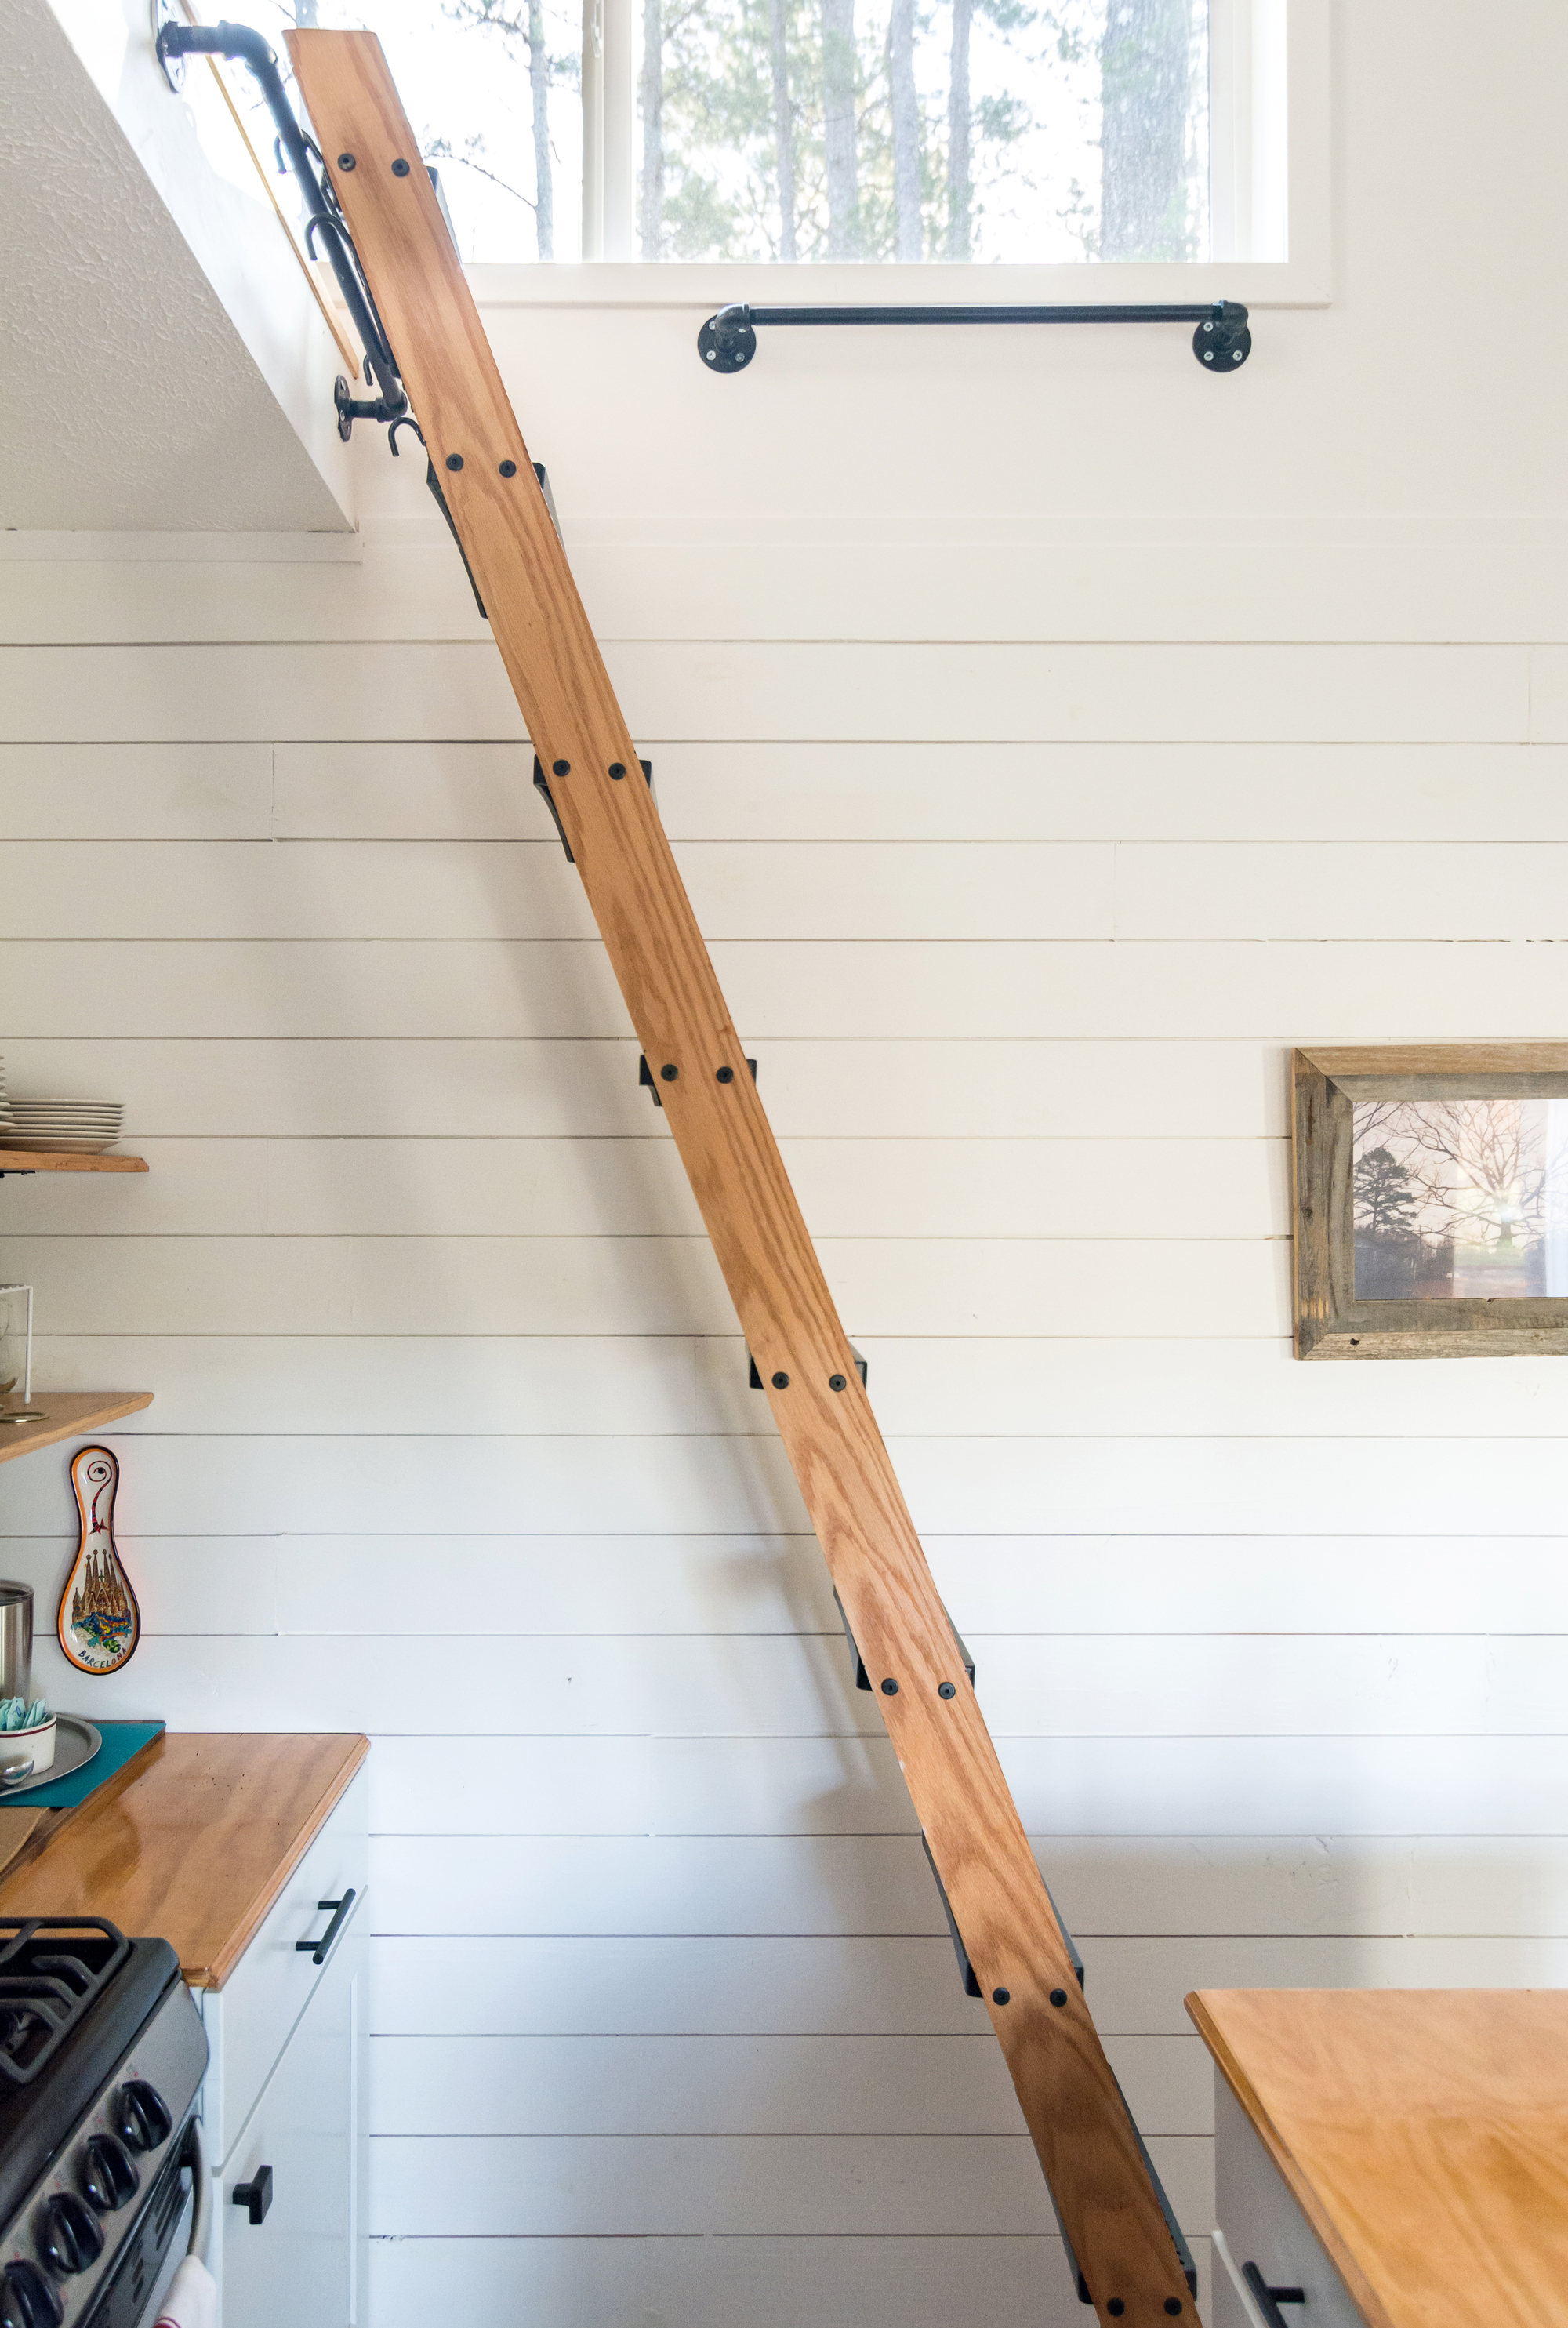 Ladder to access the upper level loft sleeping area